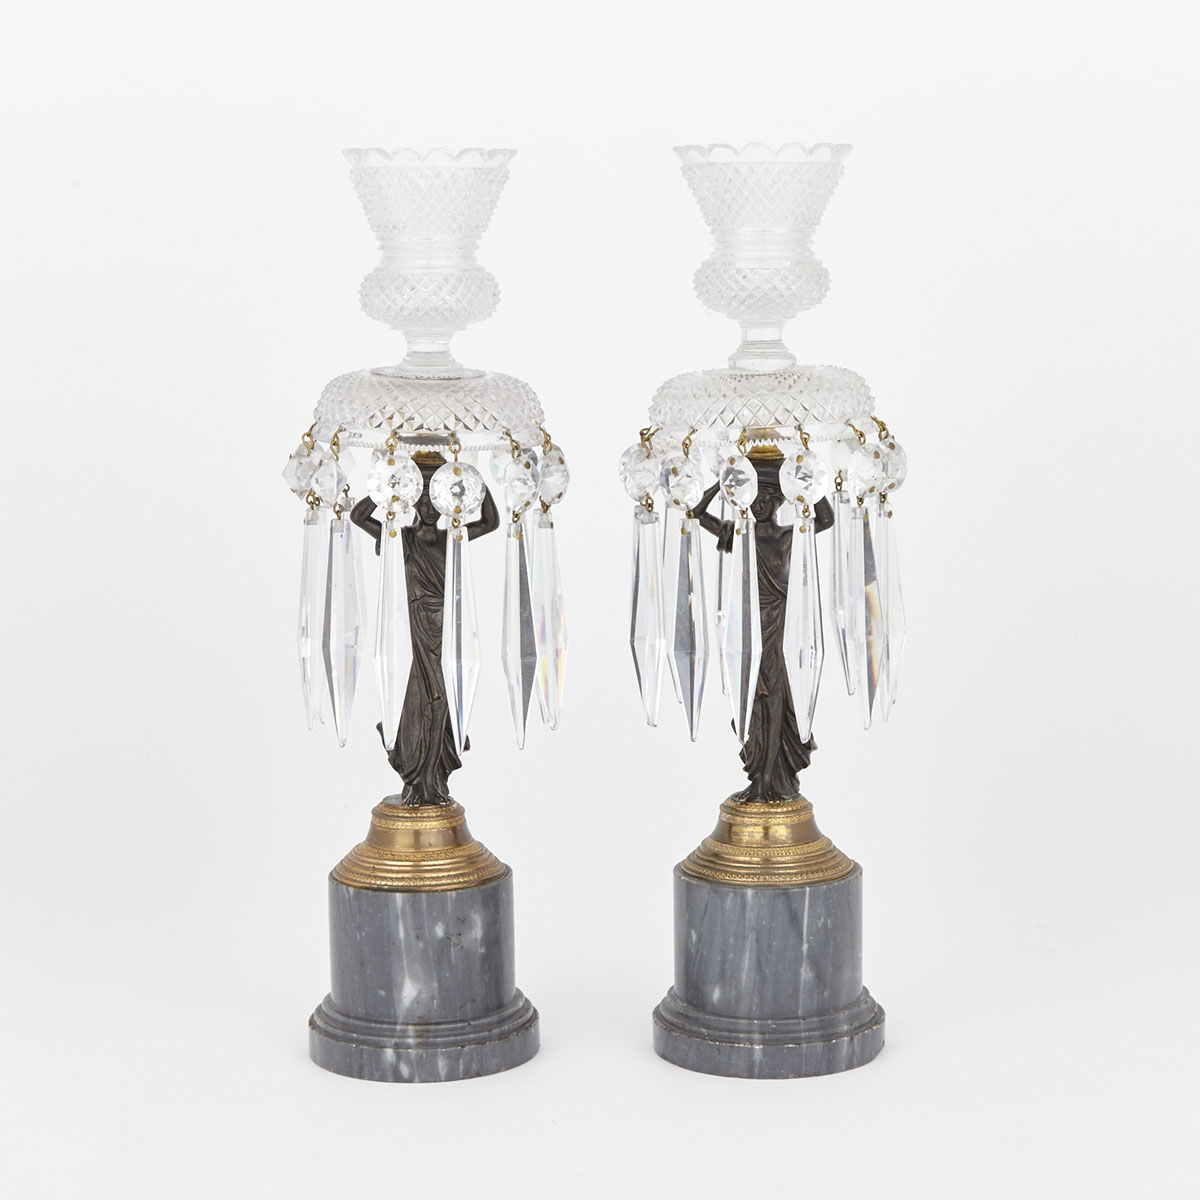 Pair of English Regency Cut Glass Mounted Gilt and Patinated Bronze Figural Candlestick Lustres, c.1820